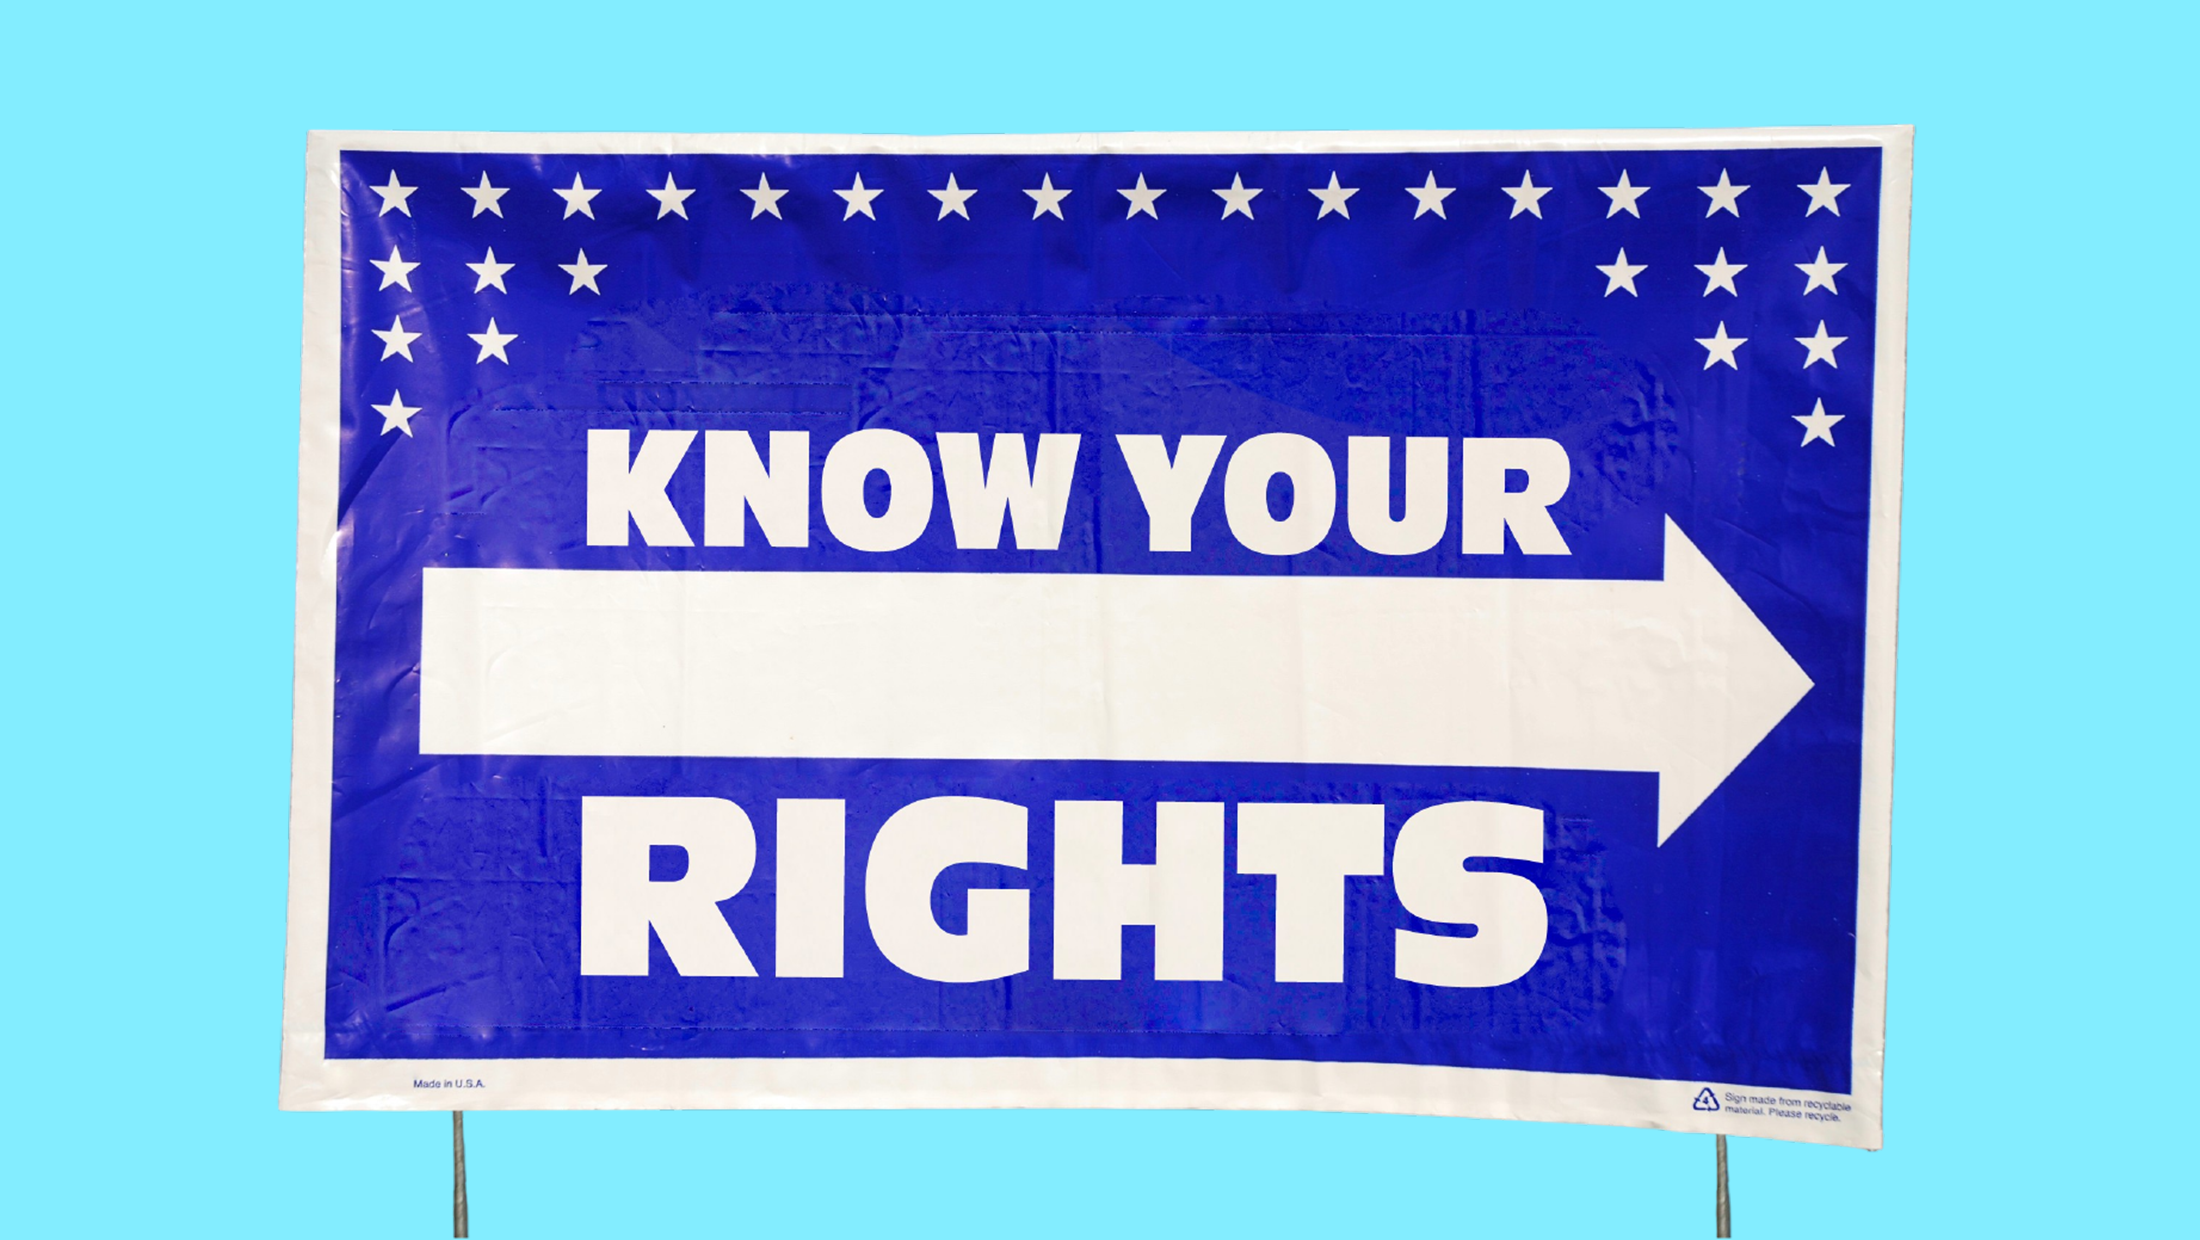 A blue yard sign with a right-pointing arrow and stars that says "KNOW YOUR RIGHTS"